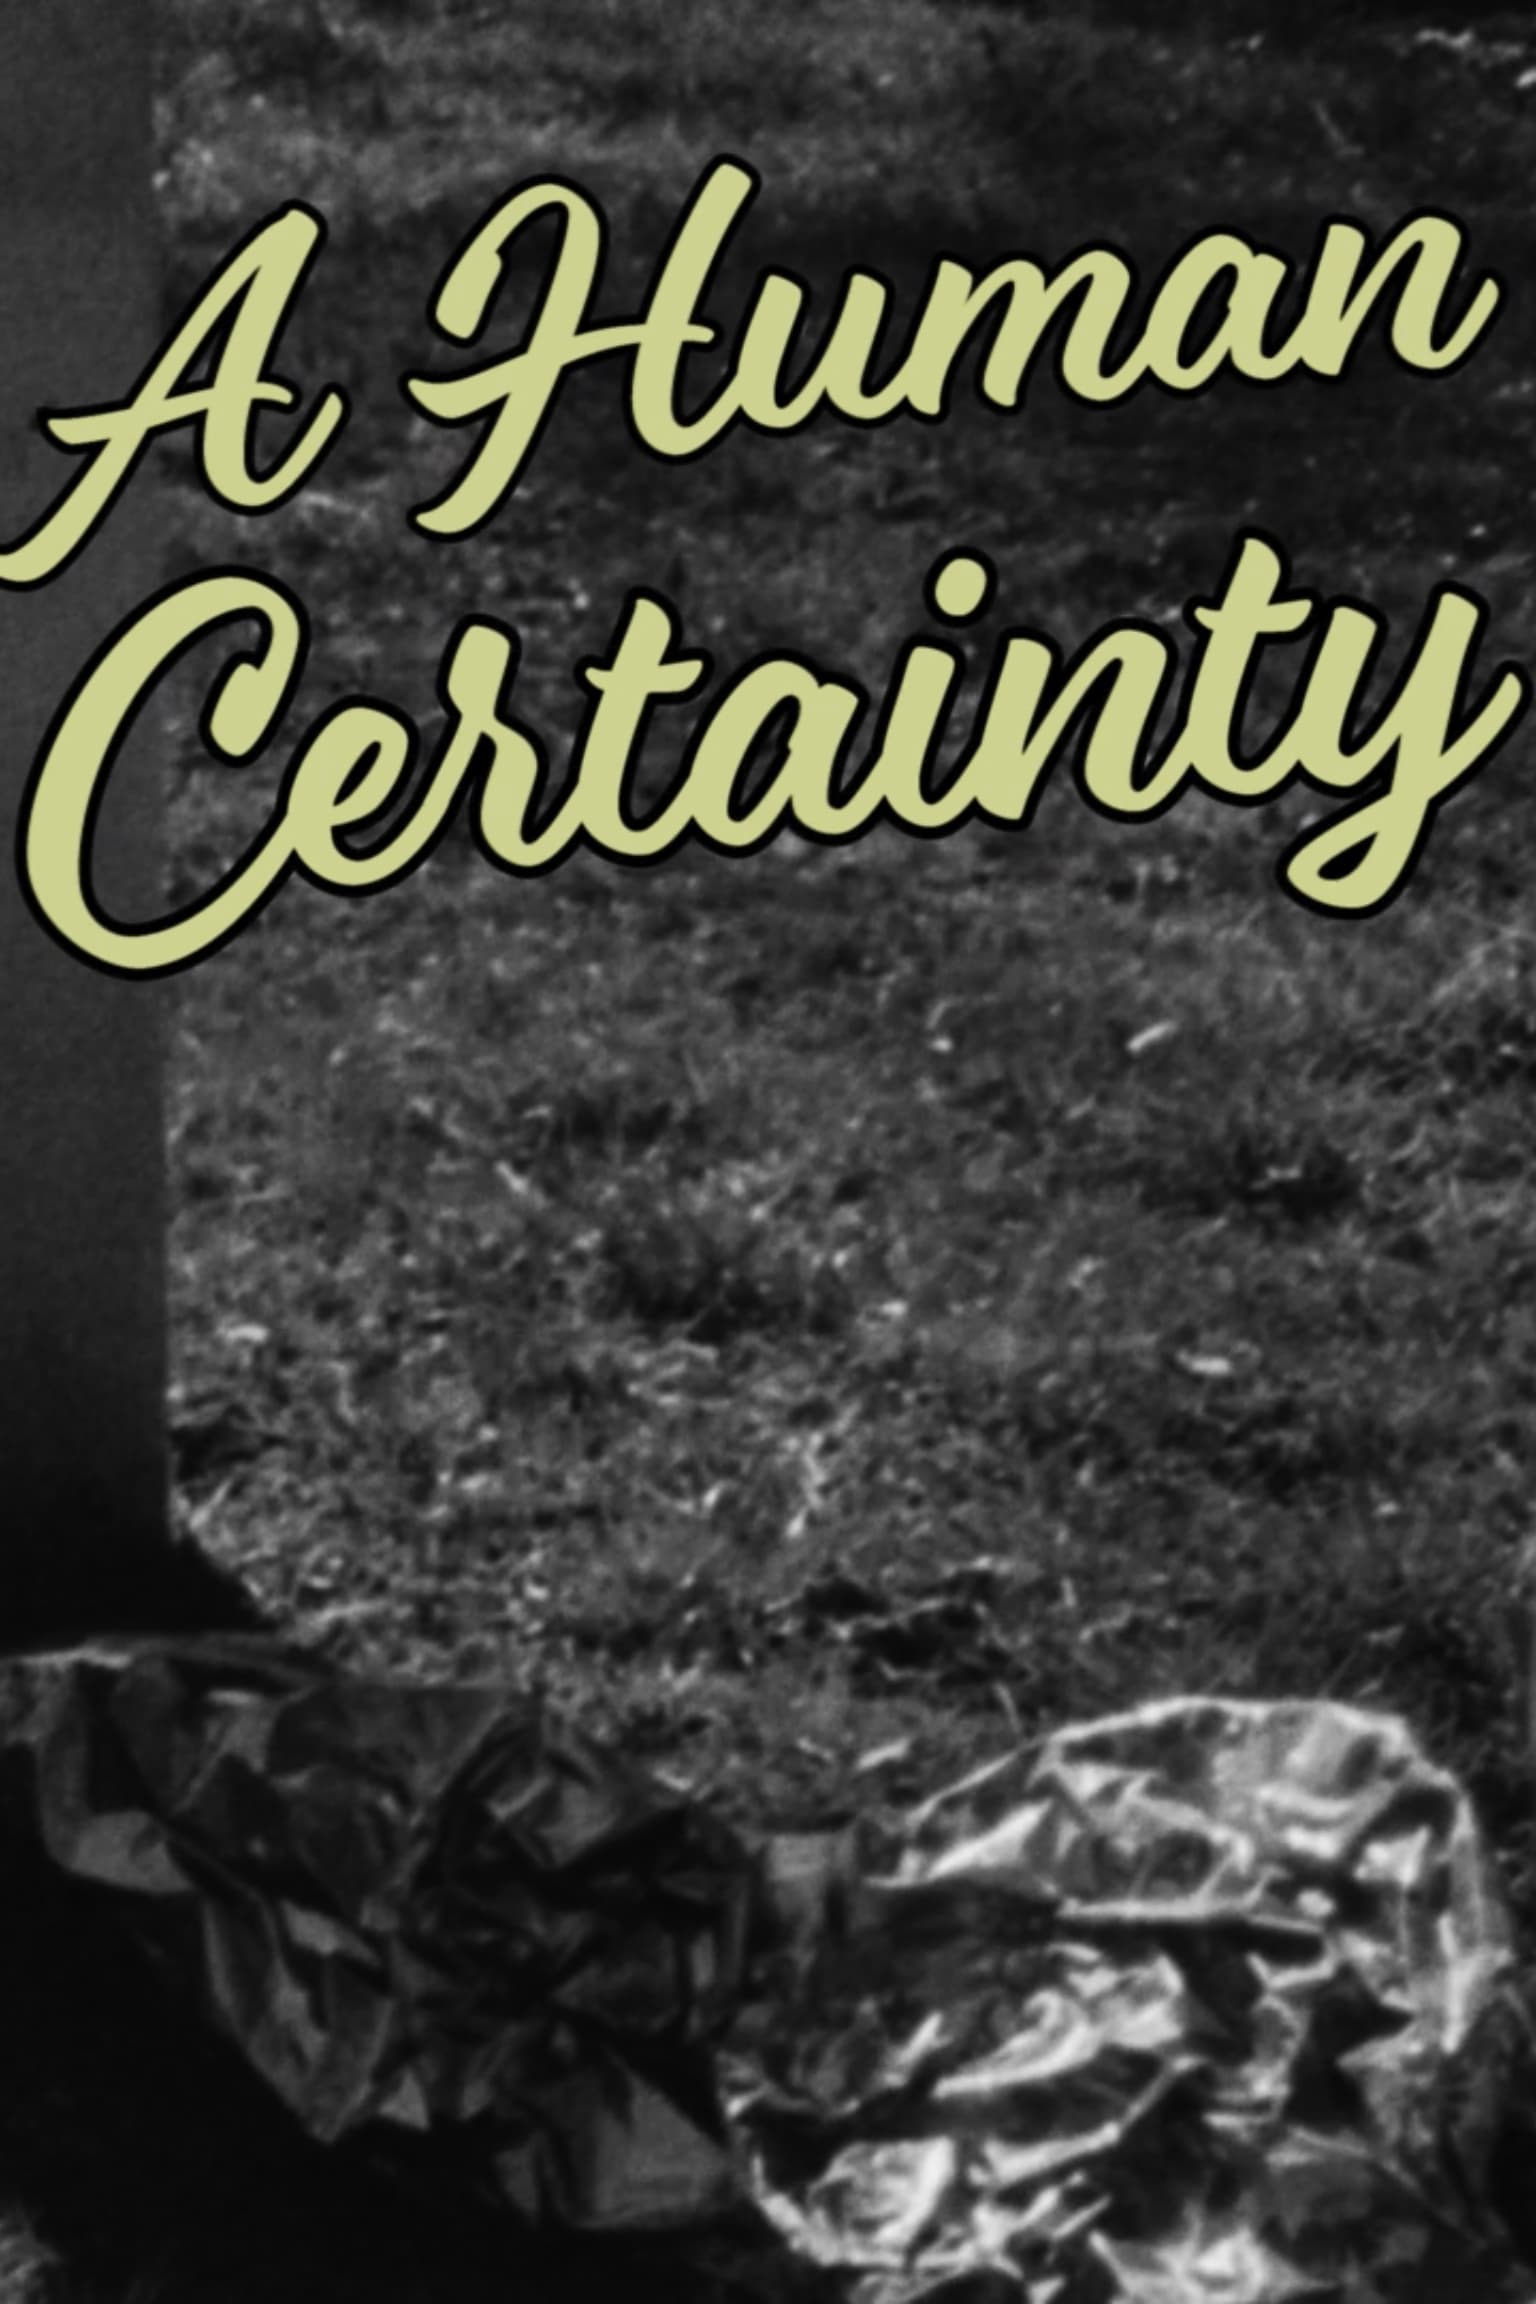 A Human Certainty